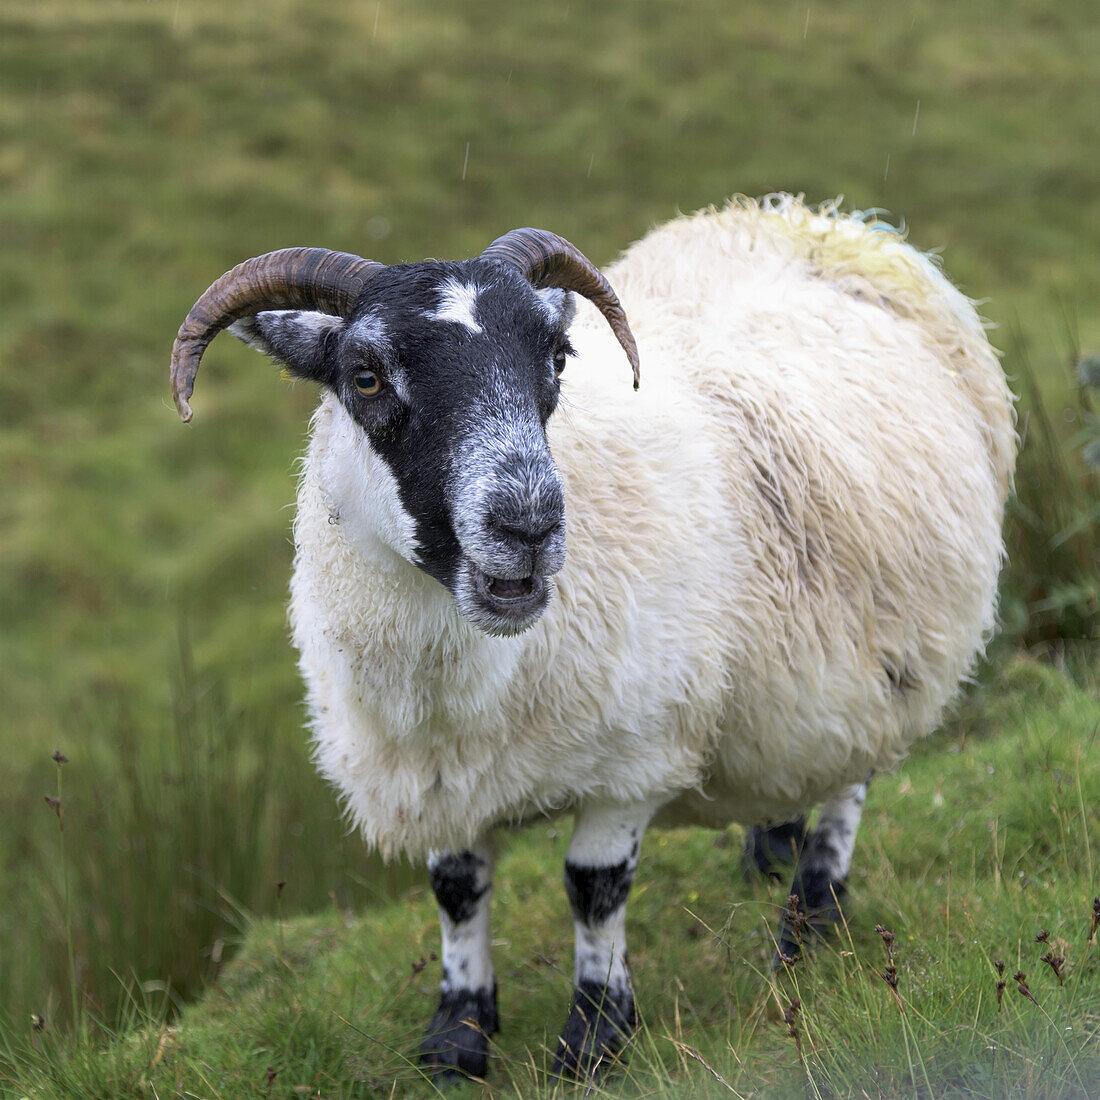 Close Up Of A Sheep With Horns; Staffin, Scotland